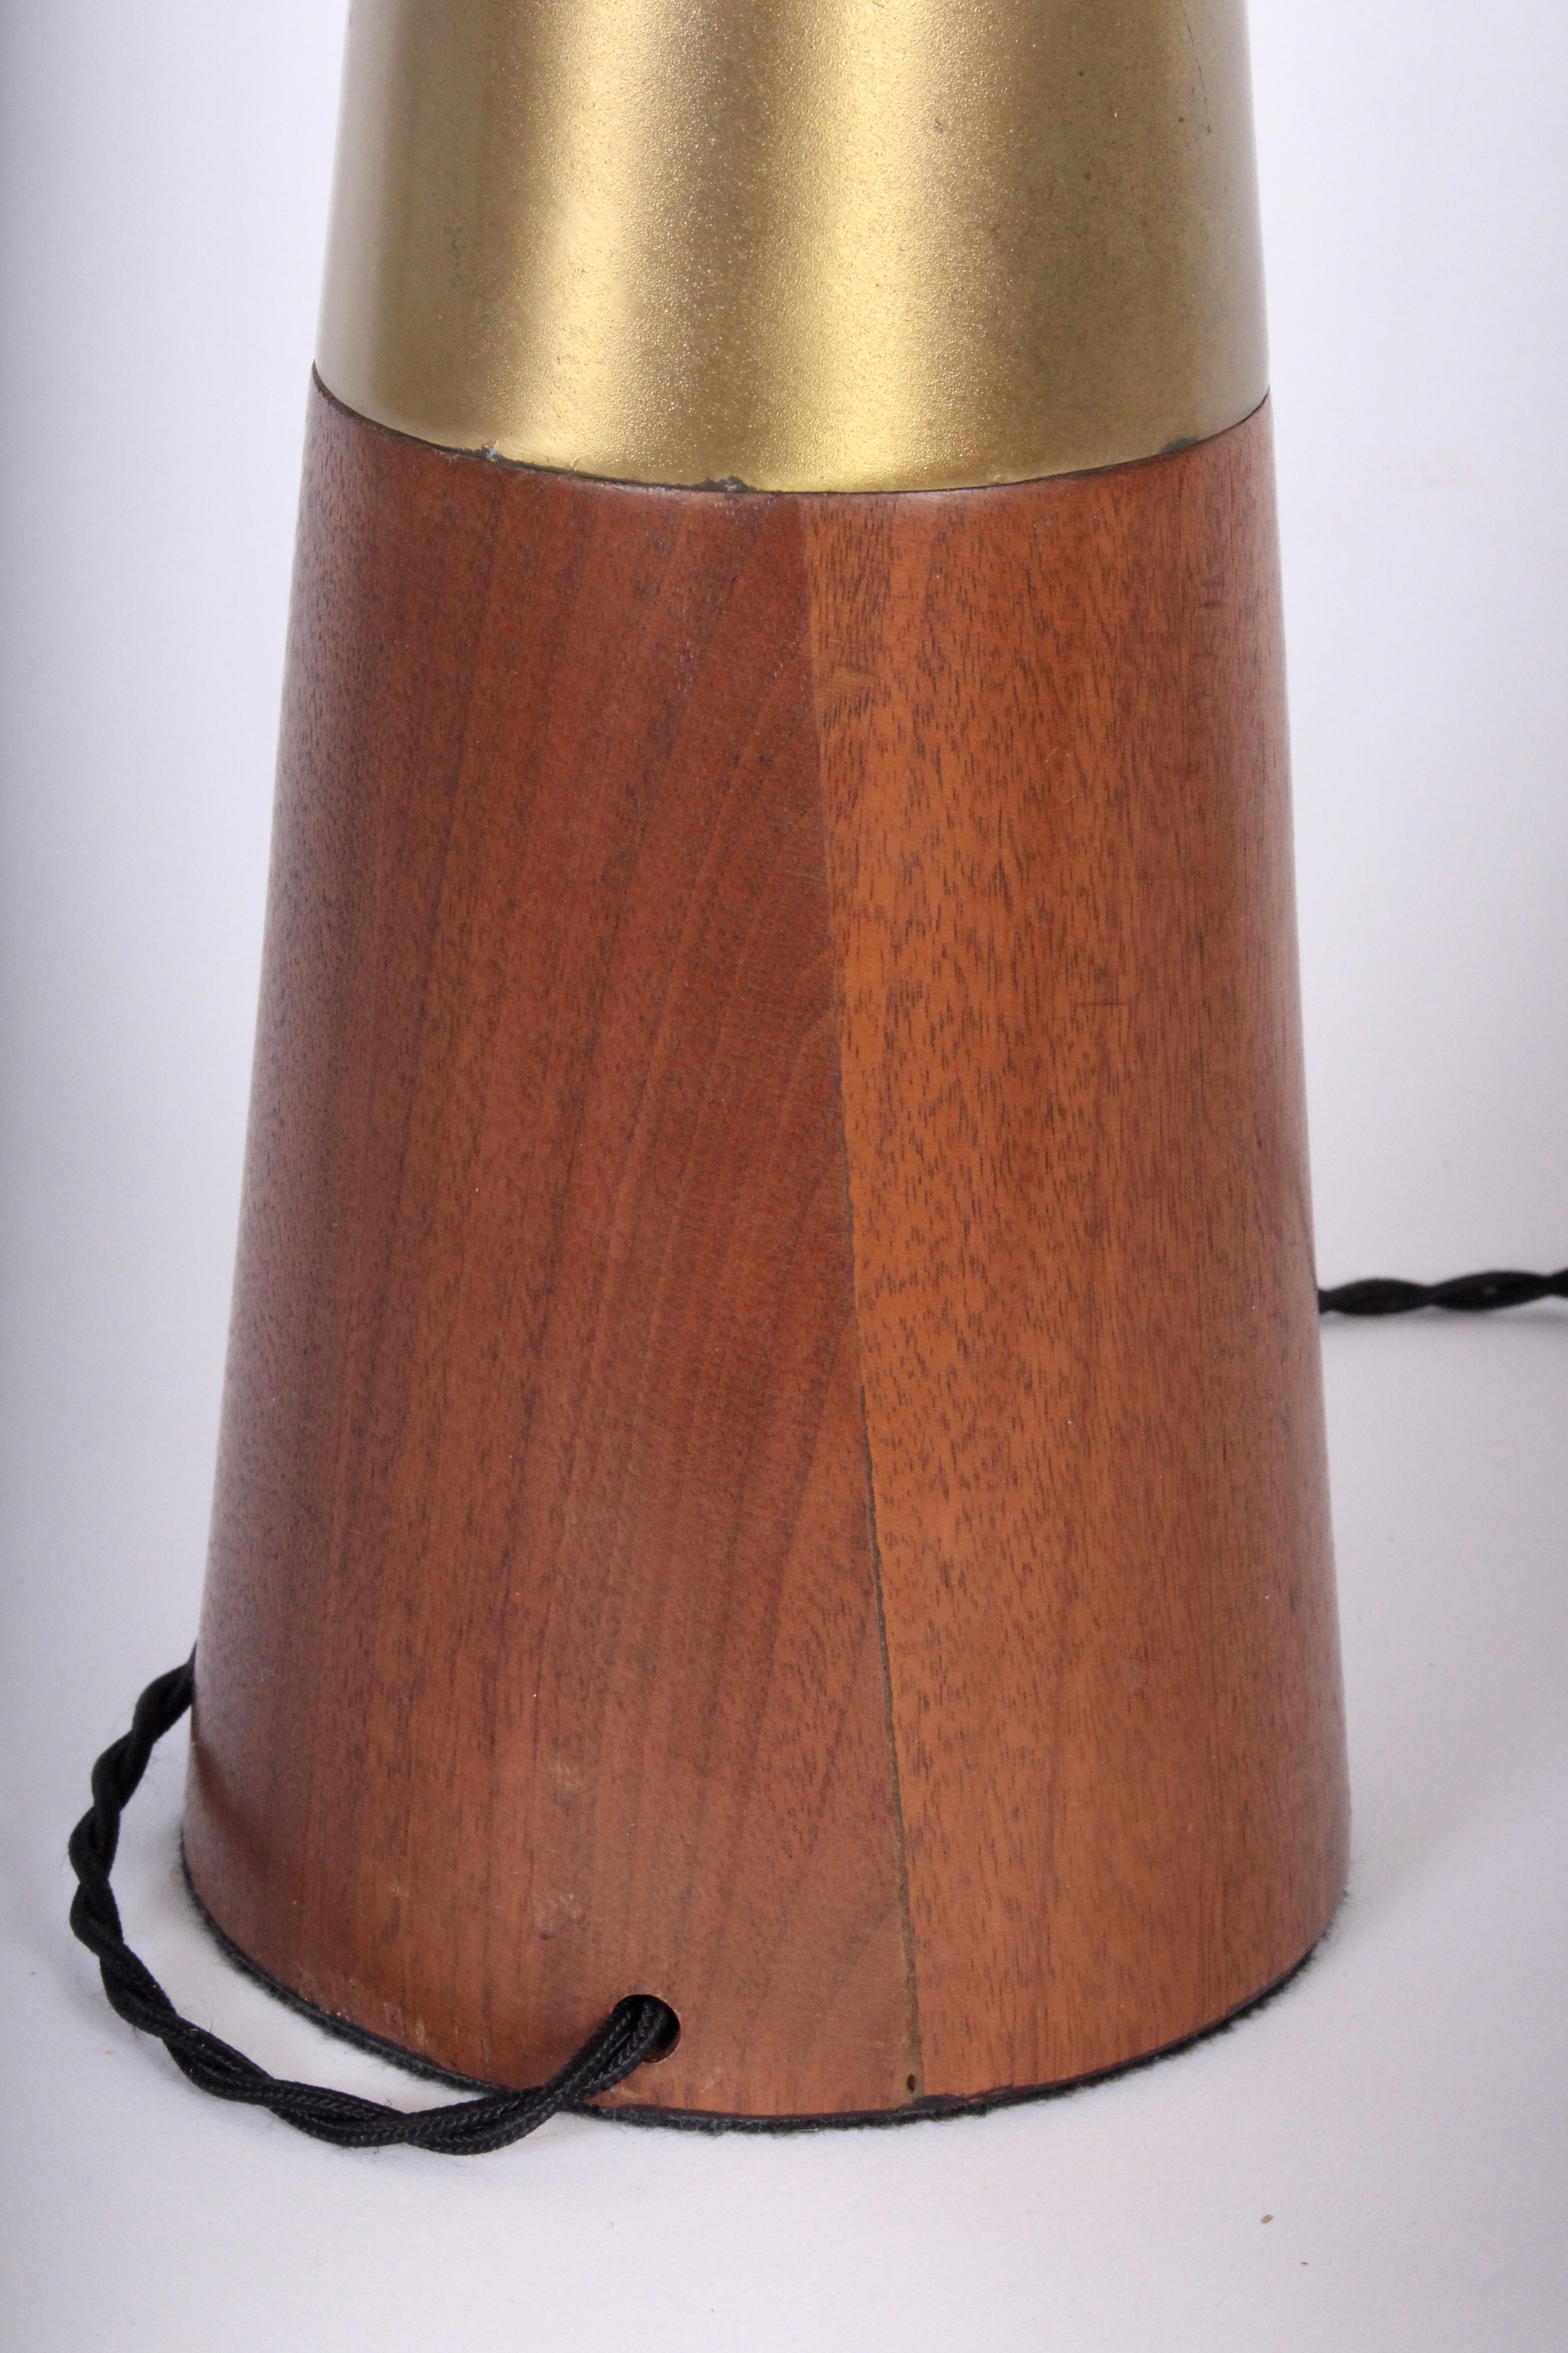 Mid-20th Century Tall Tony Paul for Westwood Swedish Brass & Solid Walnut Table Lamp, 1950s For Sale